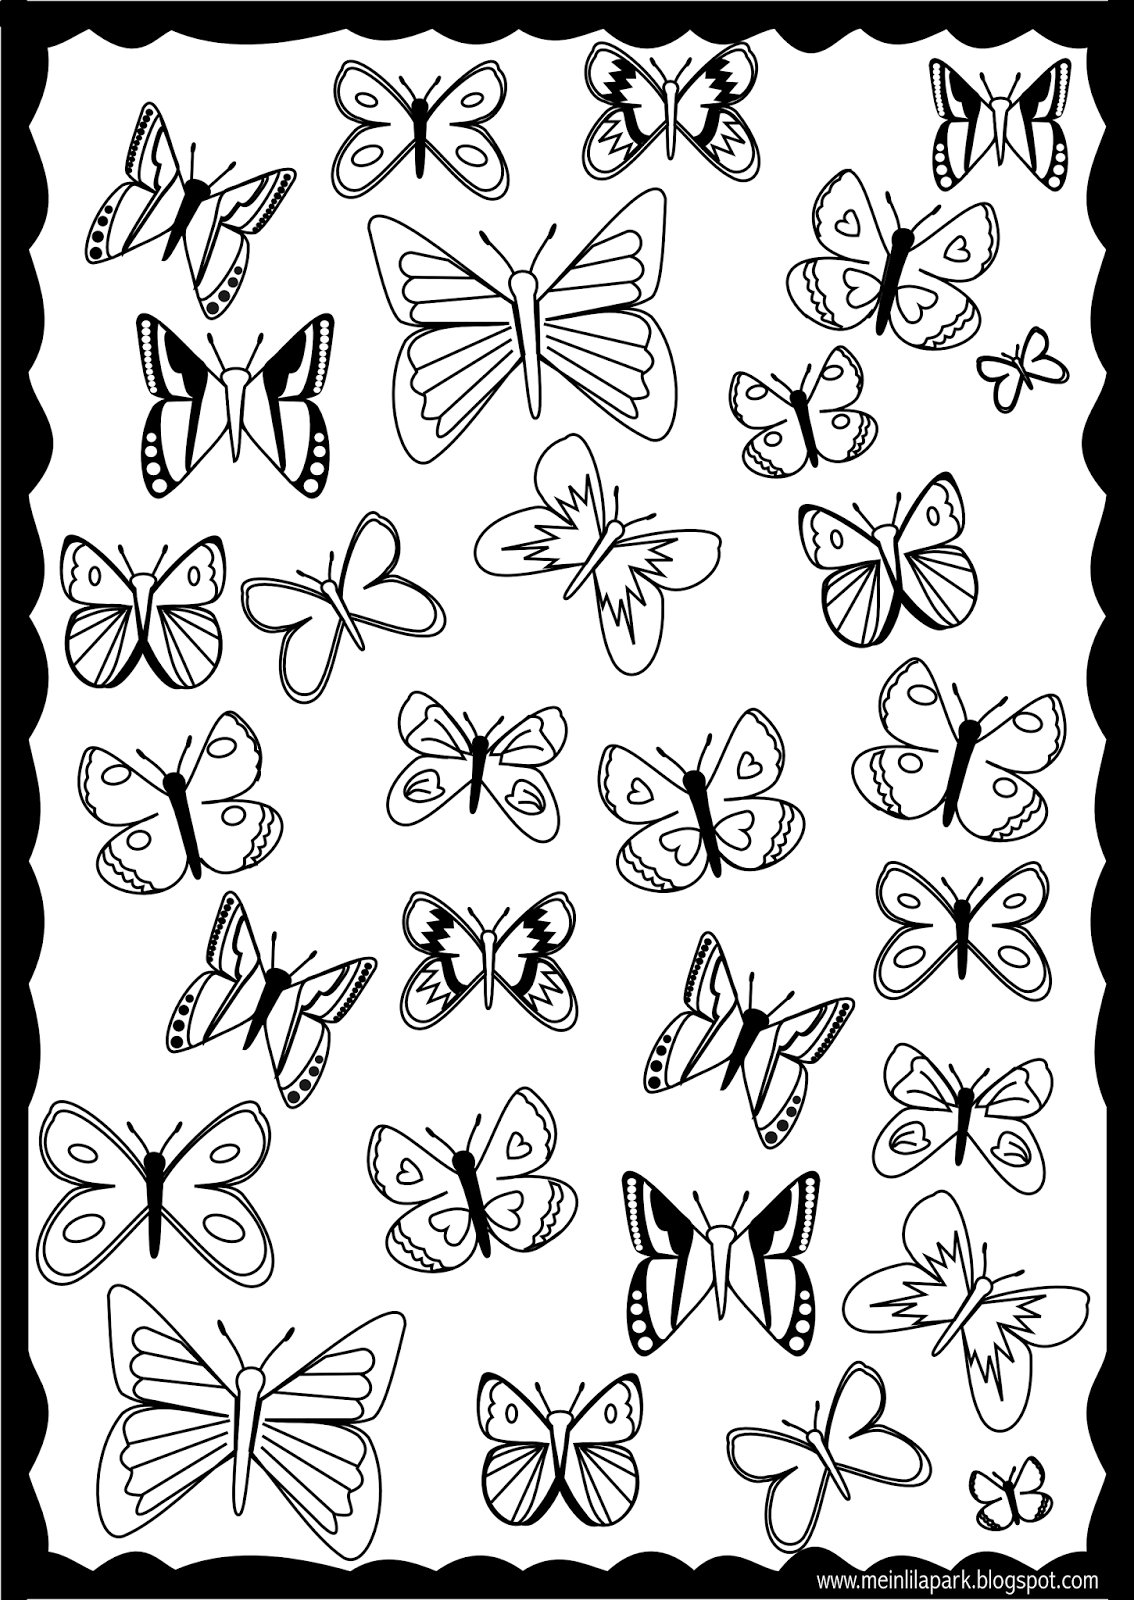 Printable Pictures Of Butterflies To Color